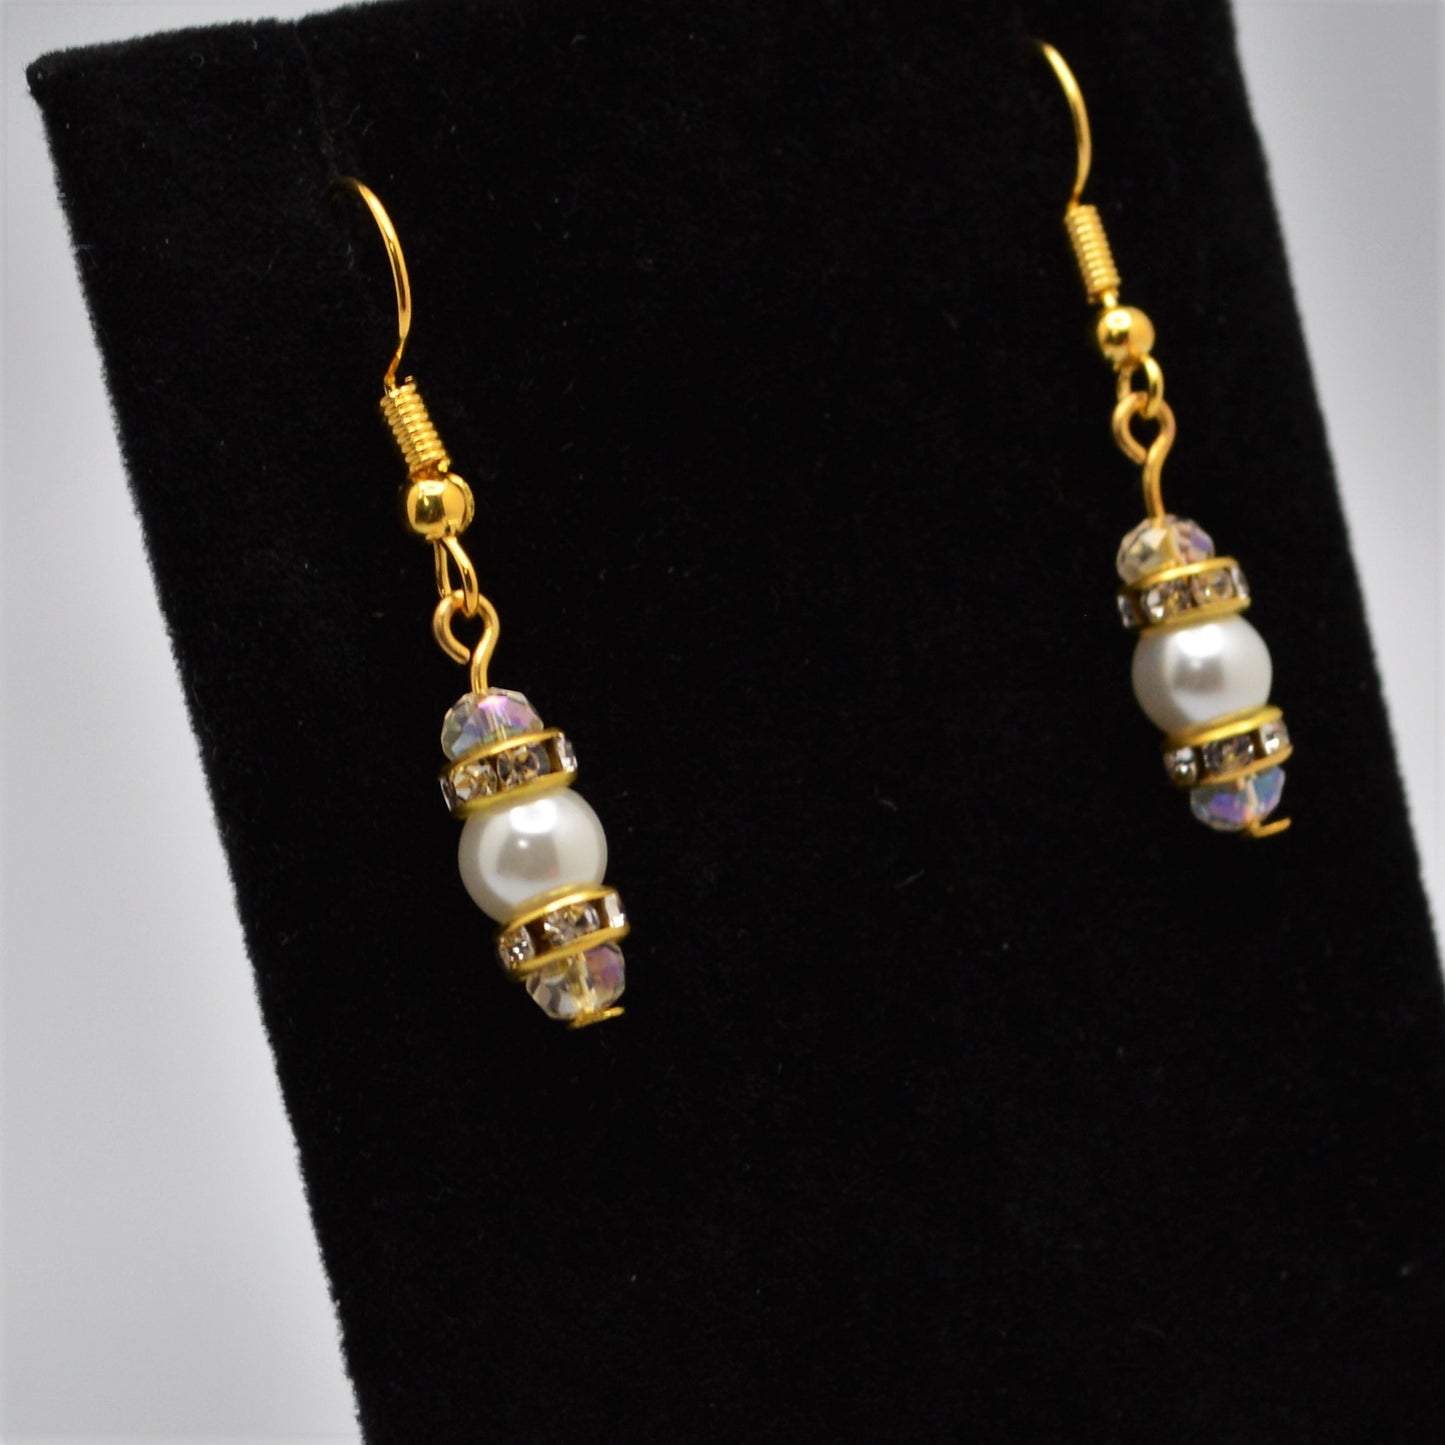 White Glass Pearl and Crystal Earrings (6mm Pearls with Gold Hooks)